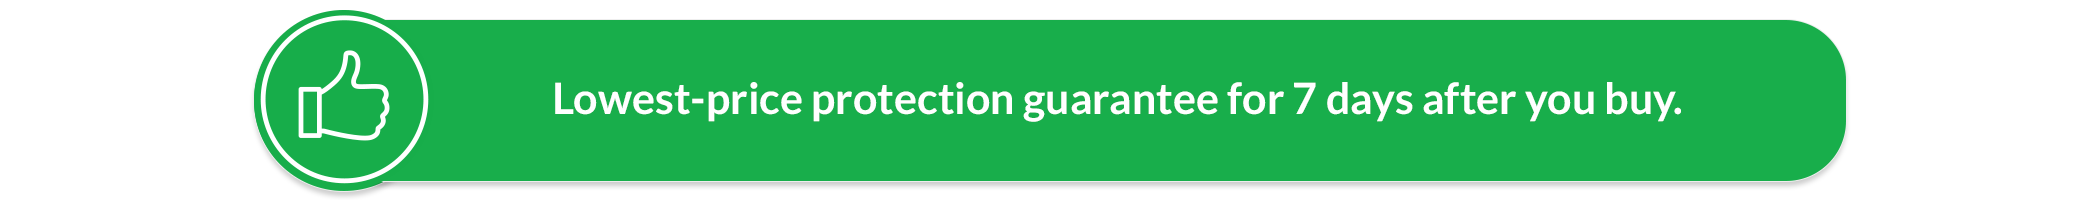 Lowest-price protection guarantee for 7 days after you buy.